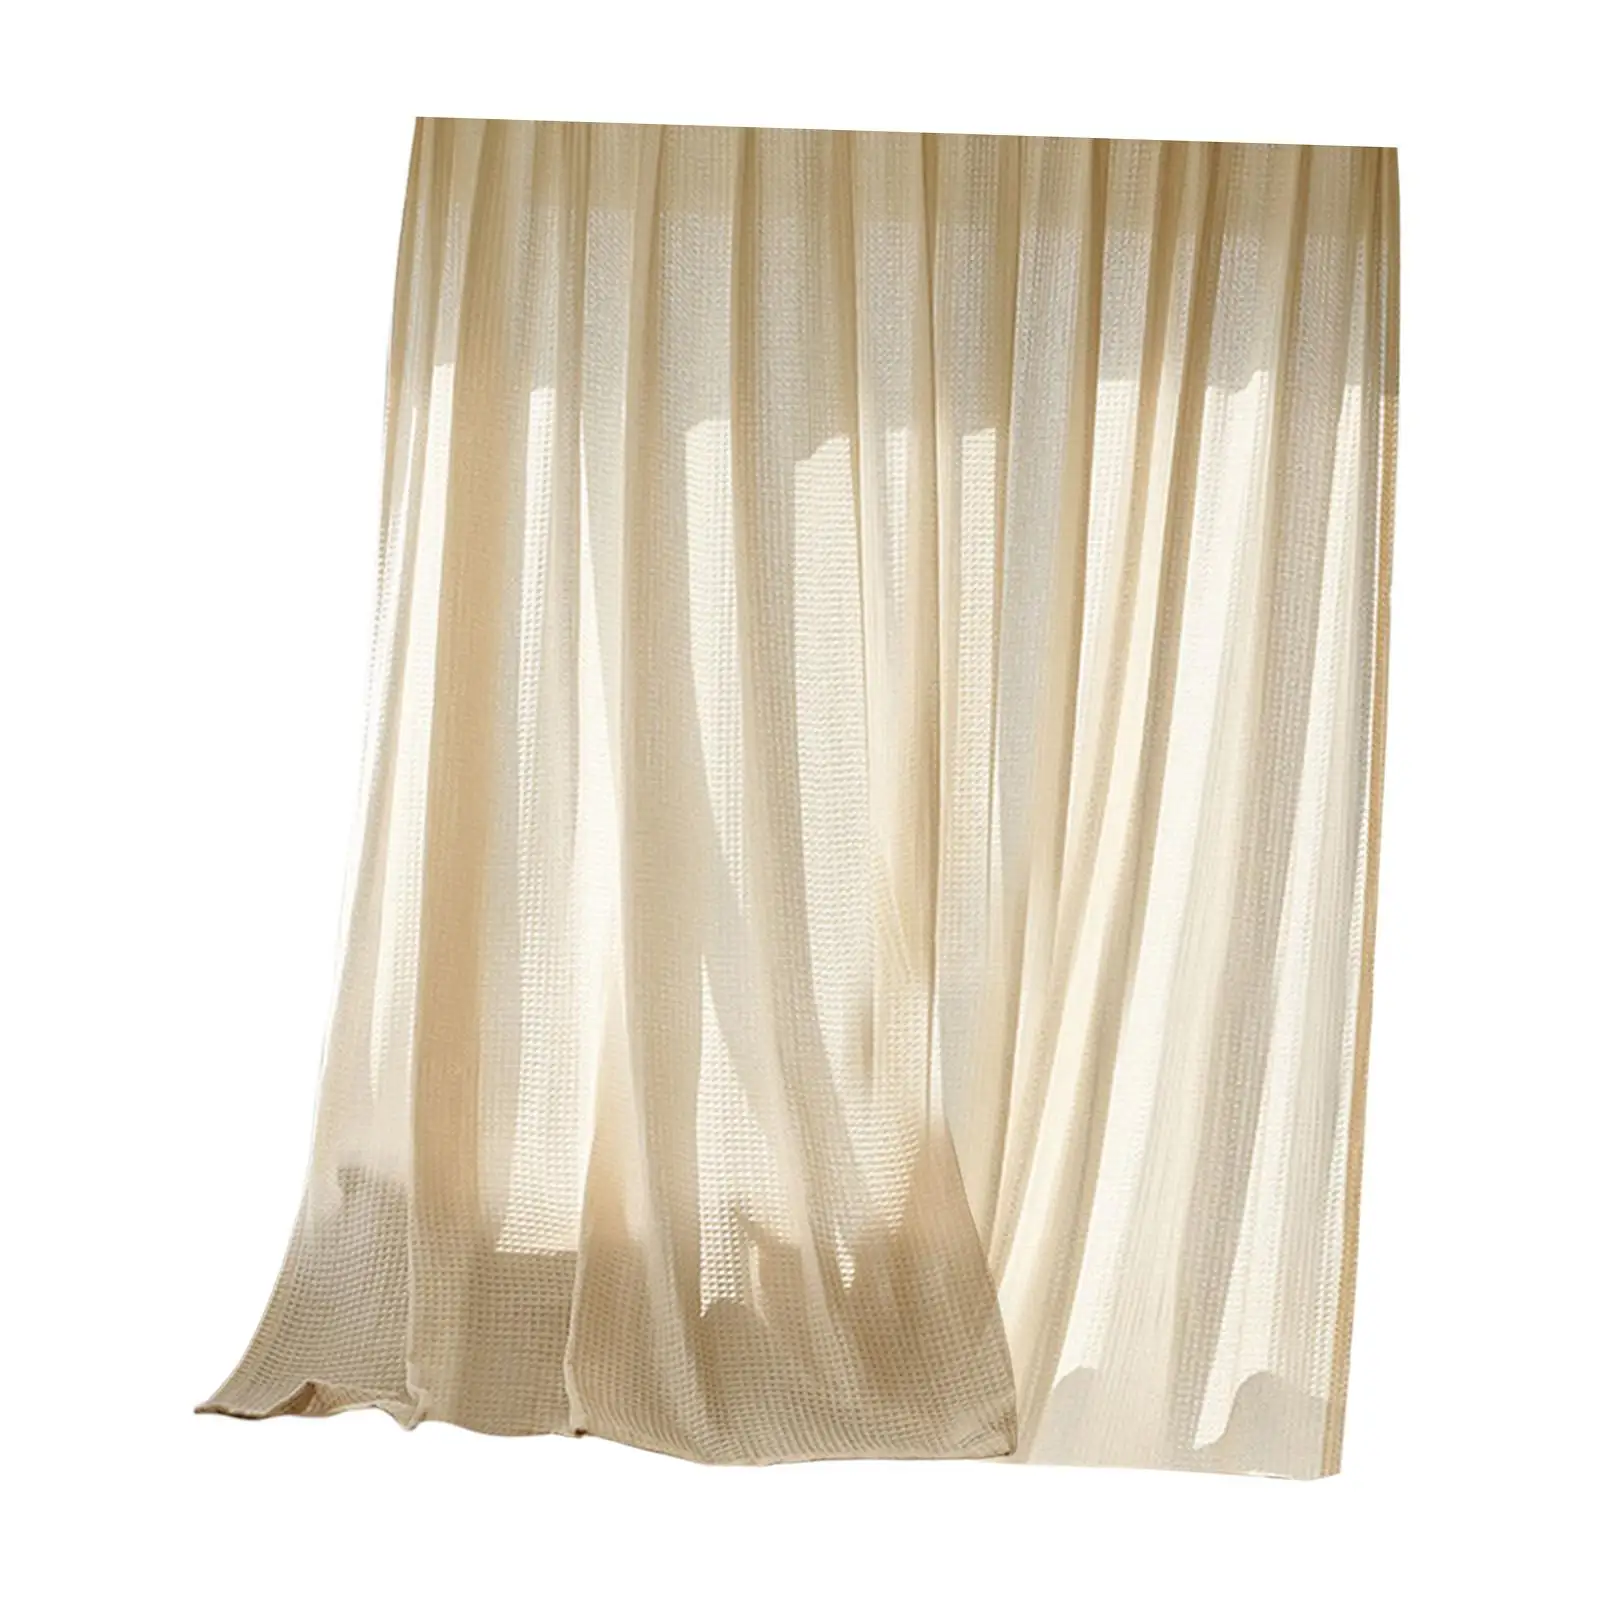 Window Treatment Rustic European Style Draperies Door Curtain Window Curtain for Dining Room Study Bedroom Office Decoration